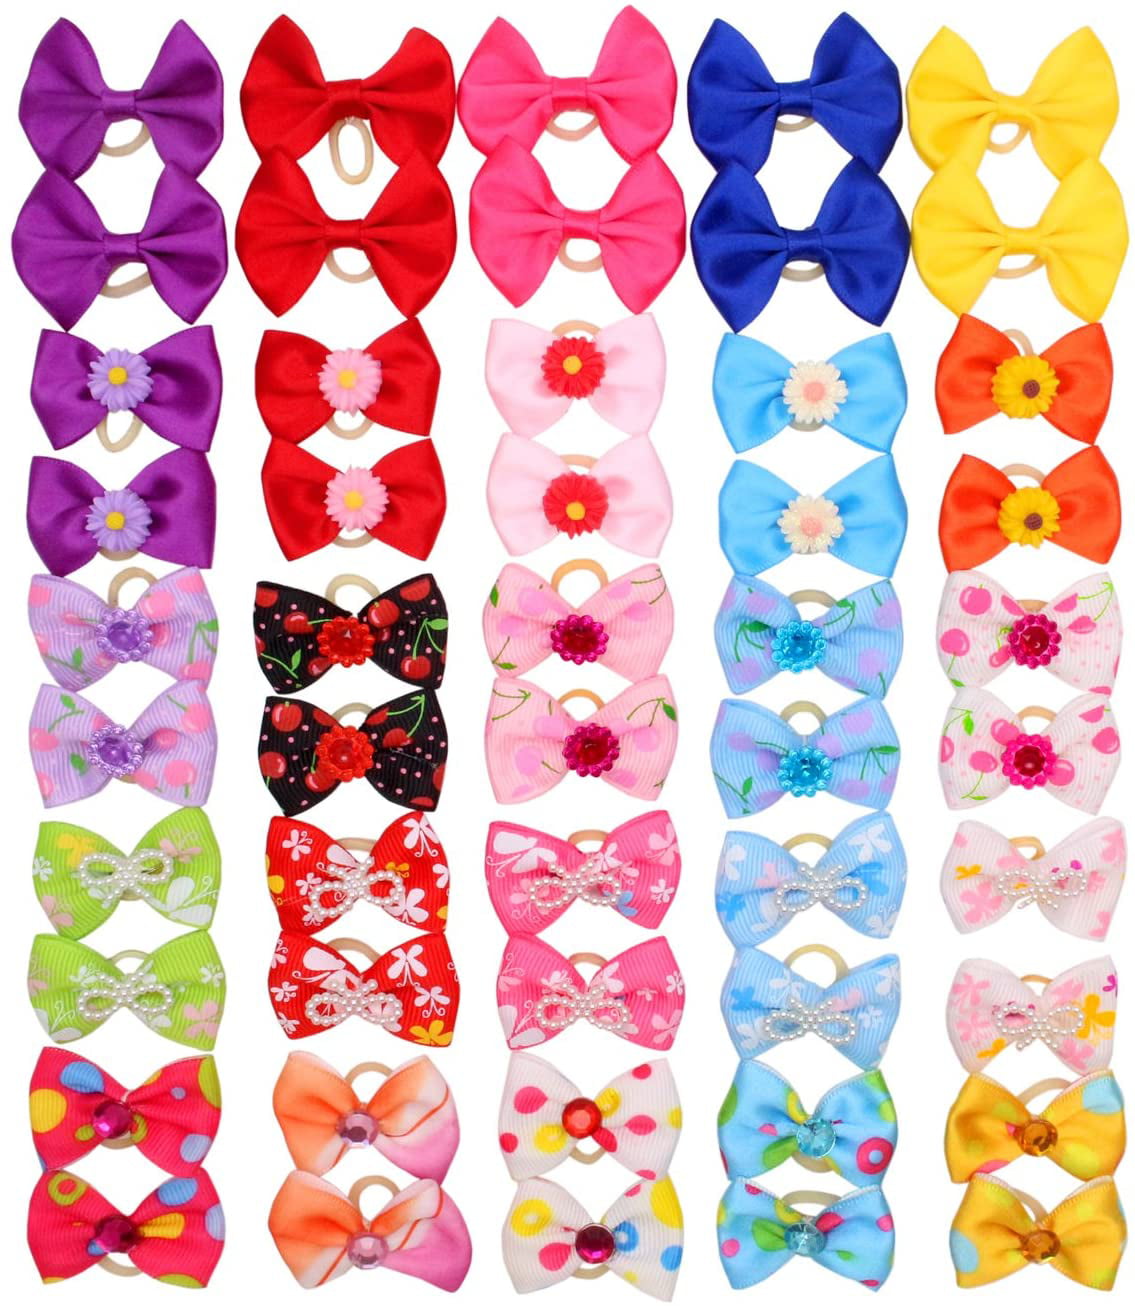 YOY Adorable Grosgrain Ribbon Pet Dog Hair Bows with Elastic Rubber Bands Doggy Kitty Topknot Grooming Accessories Set for Long Hair Puppy Cat 